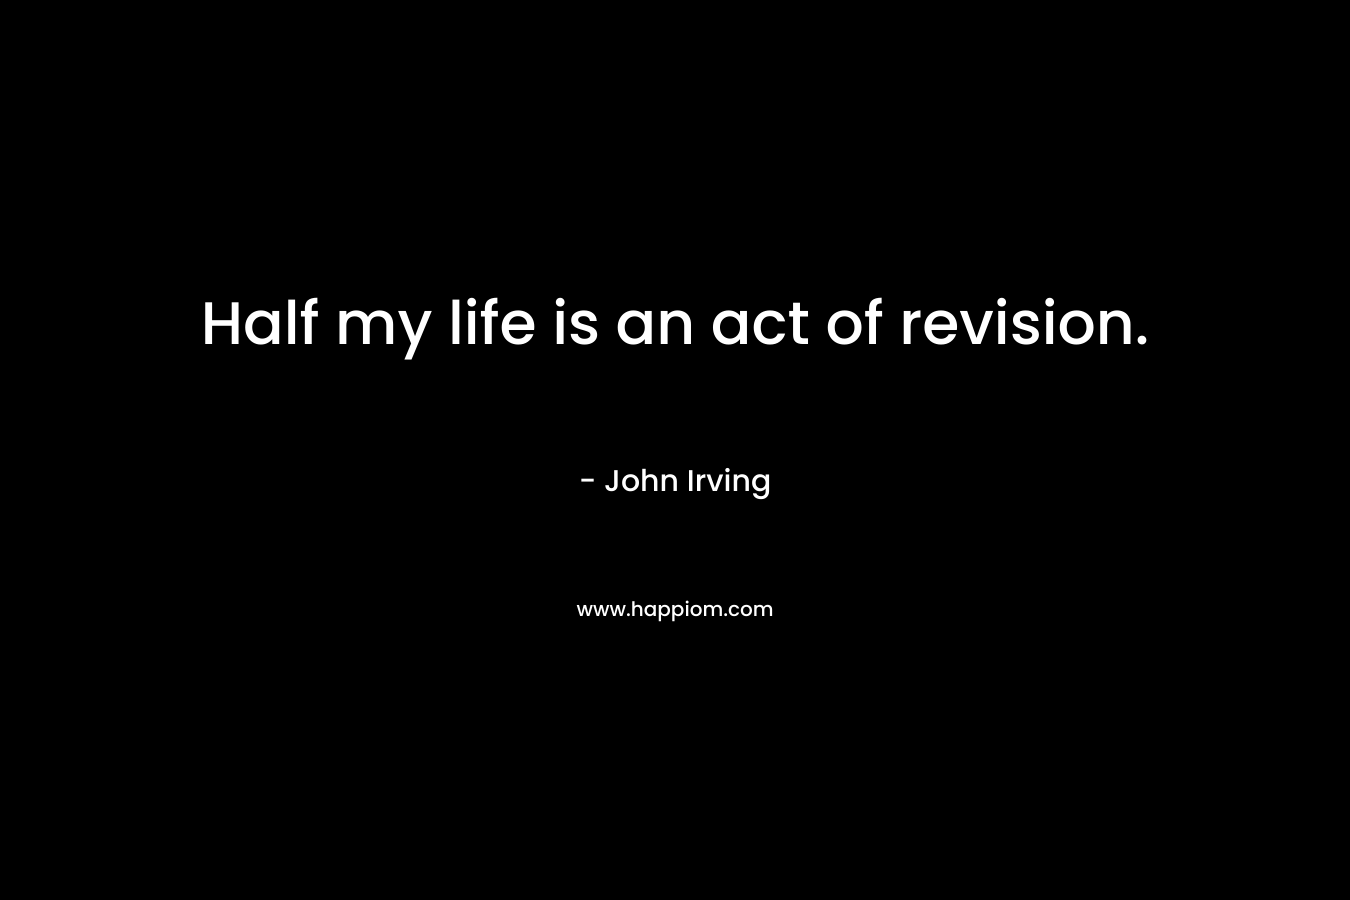 Half my life is an act of revision. – John Irving